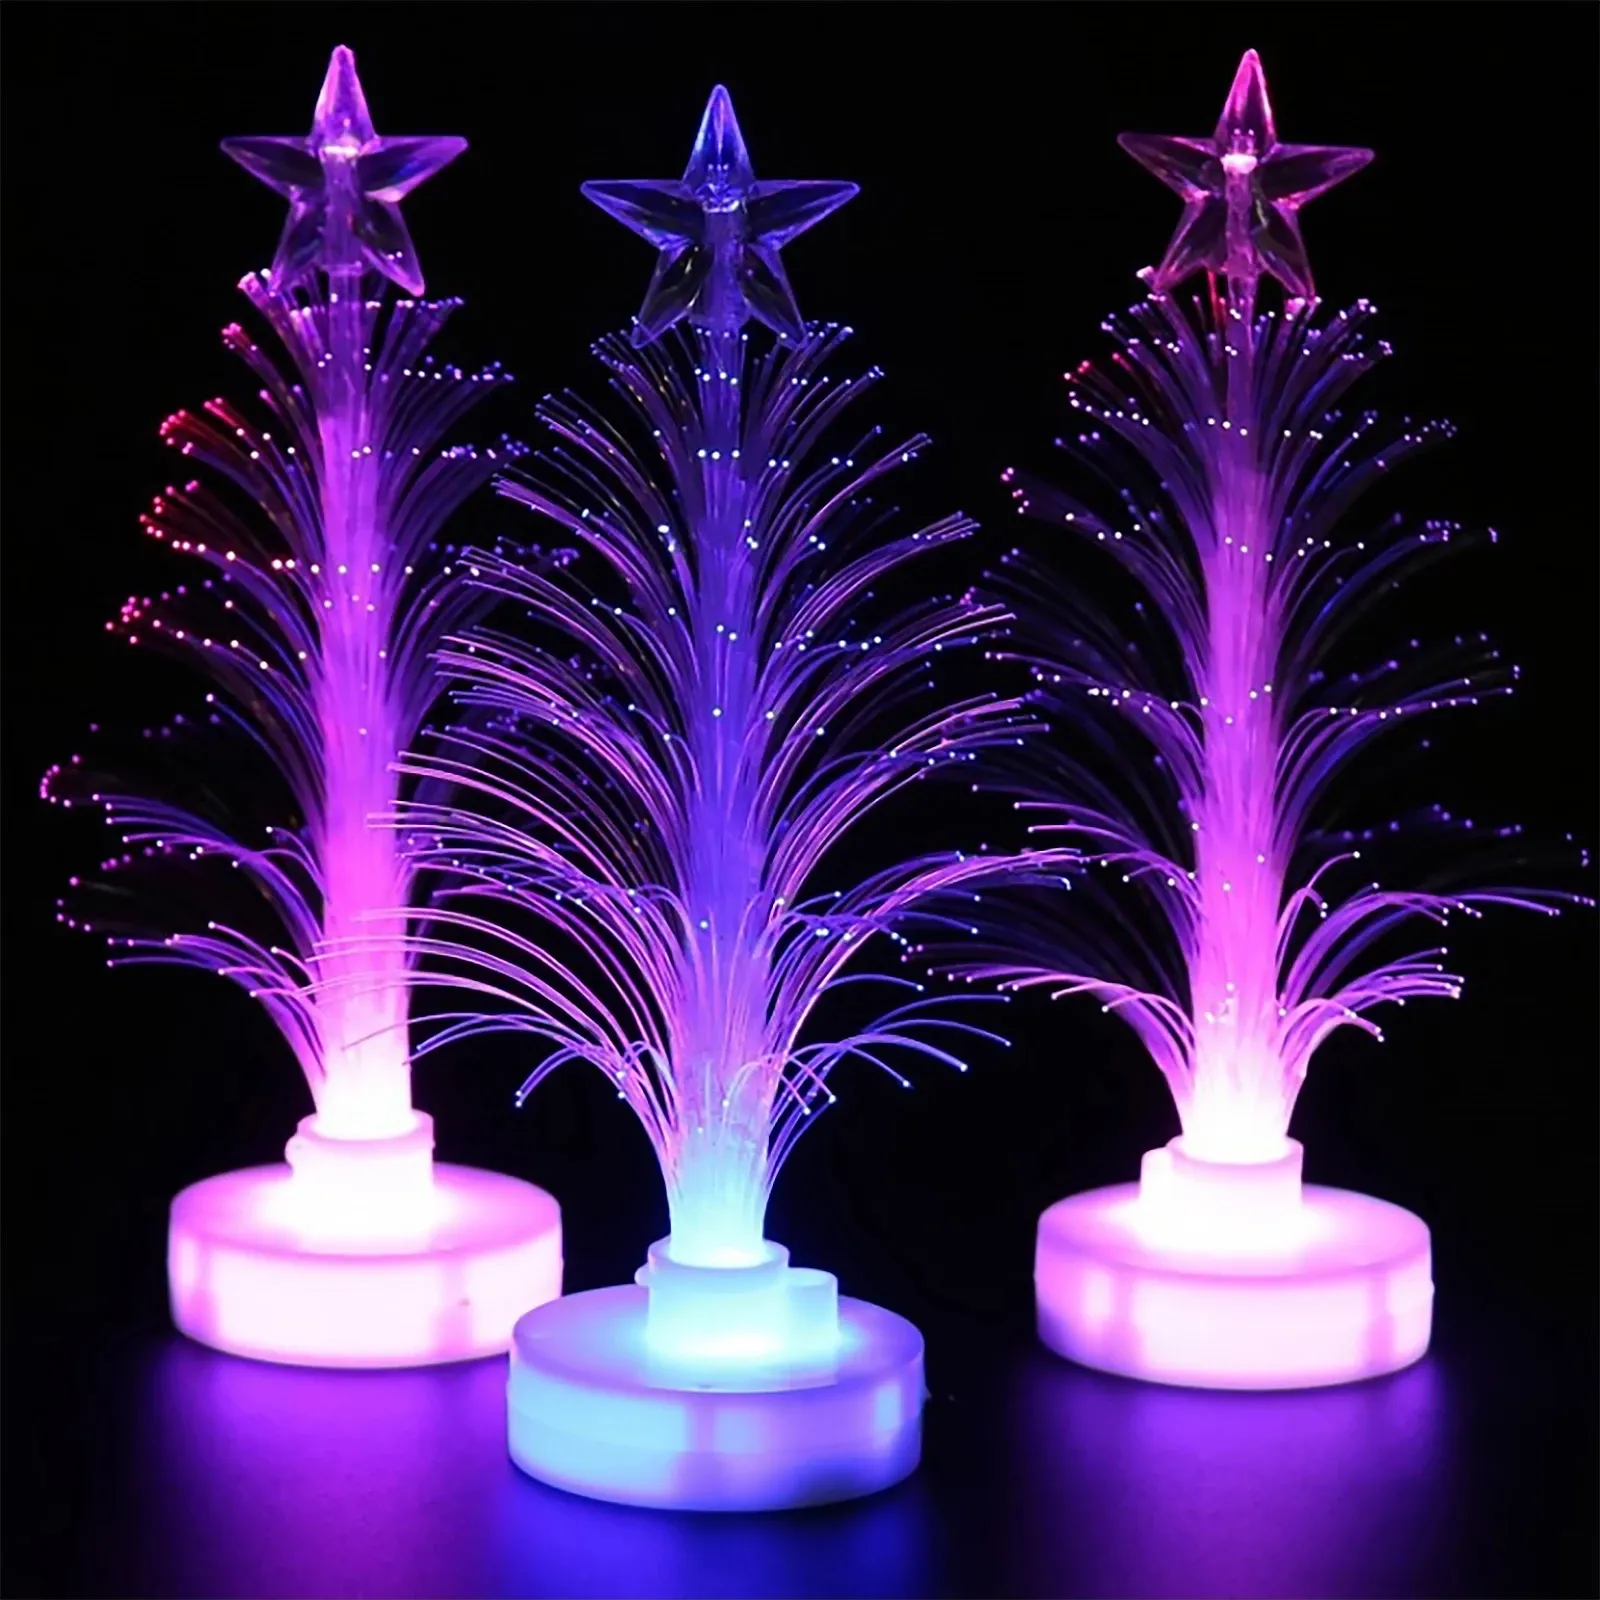 Christmas Tree Netting LED Flash Fiber Optic Lamp USB Power Color Decoration Night Light With Star Top For Christmas Gifts